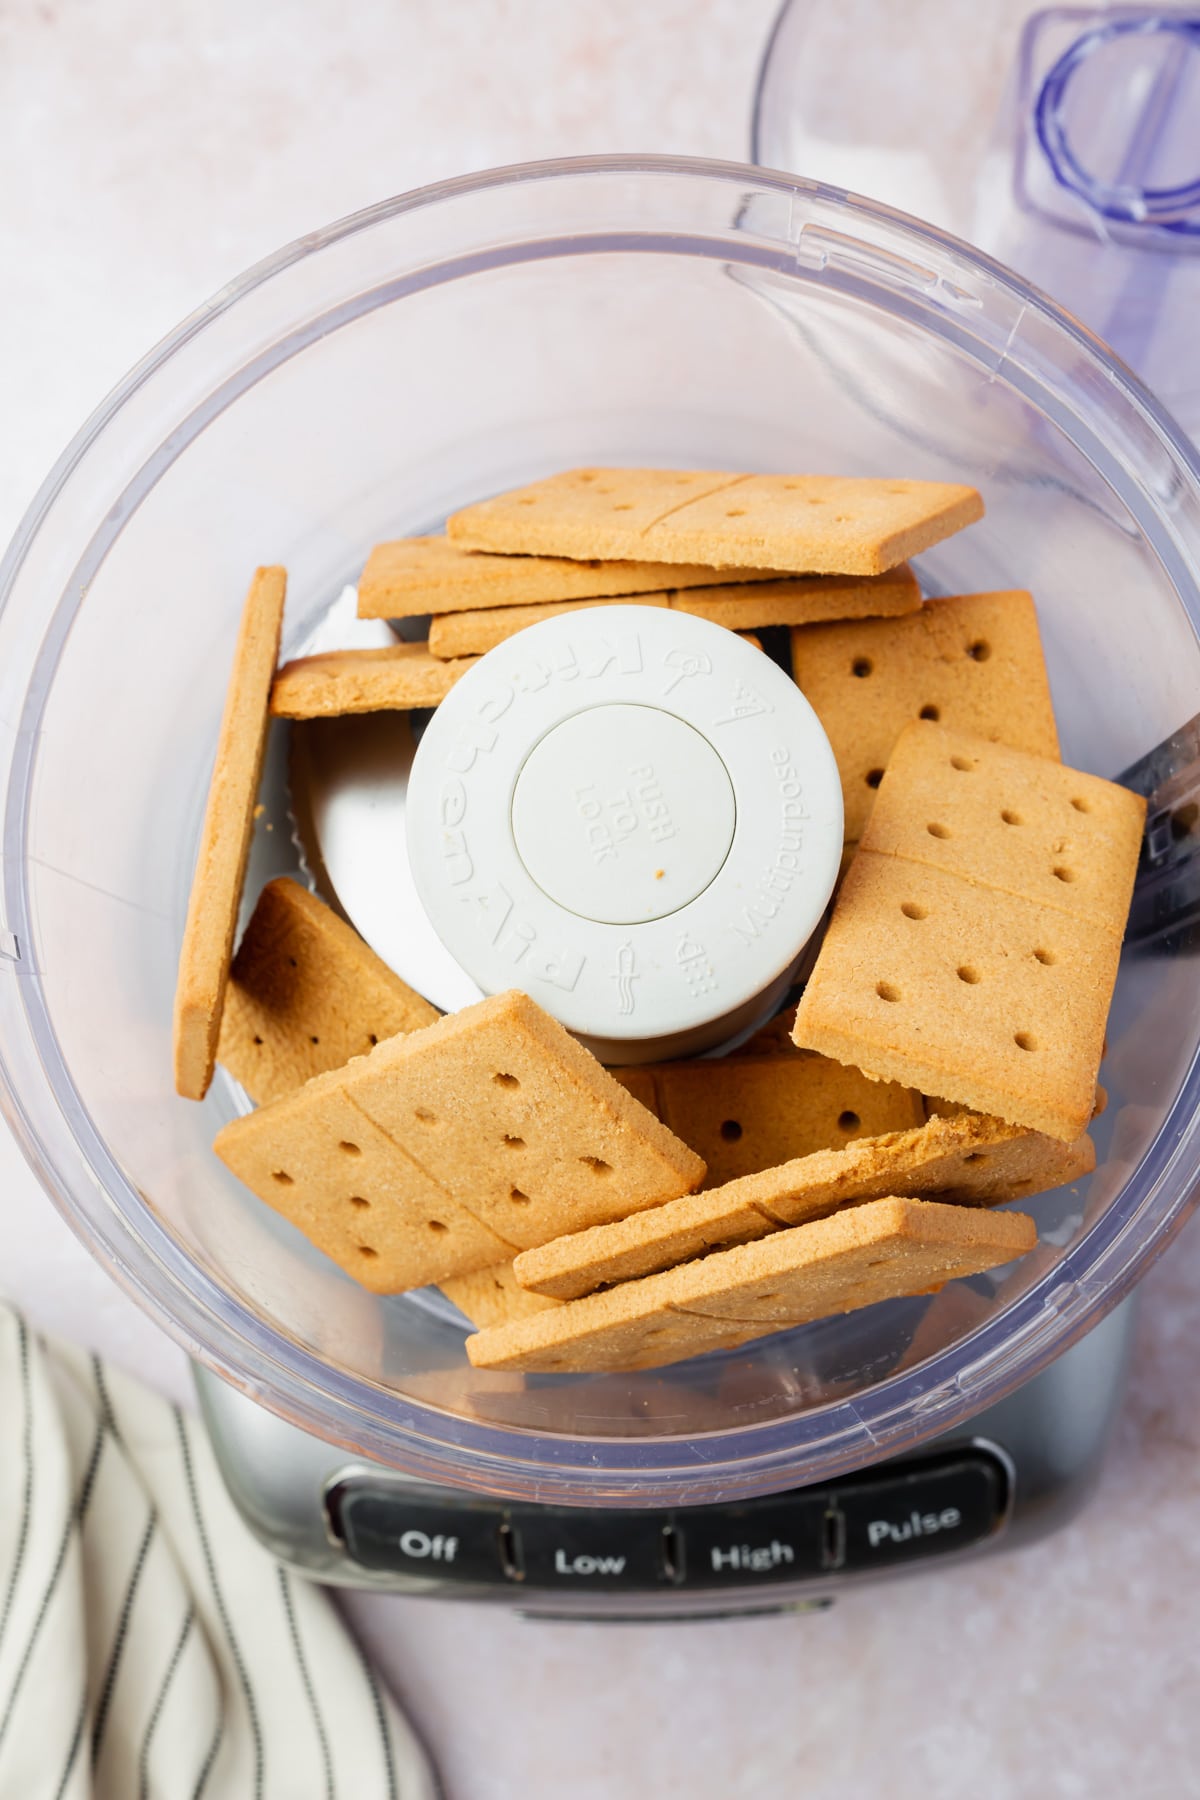 Gluten-free graham crackers in a food processor before processing.